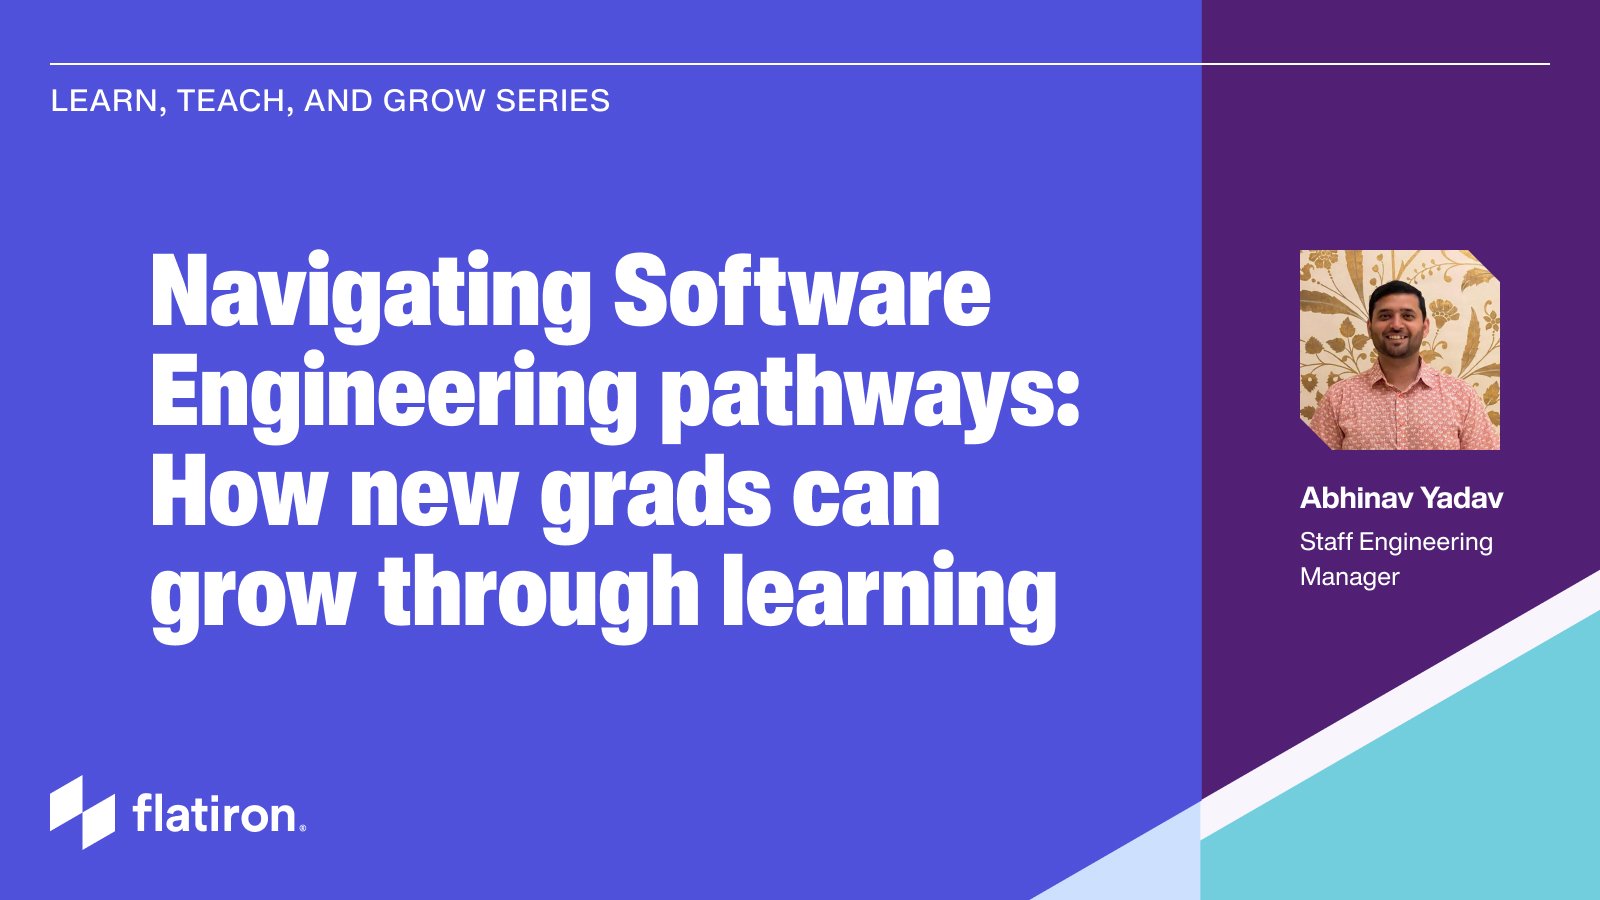 Navigating Software Engineering pathways: How new grads can grow through learning